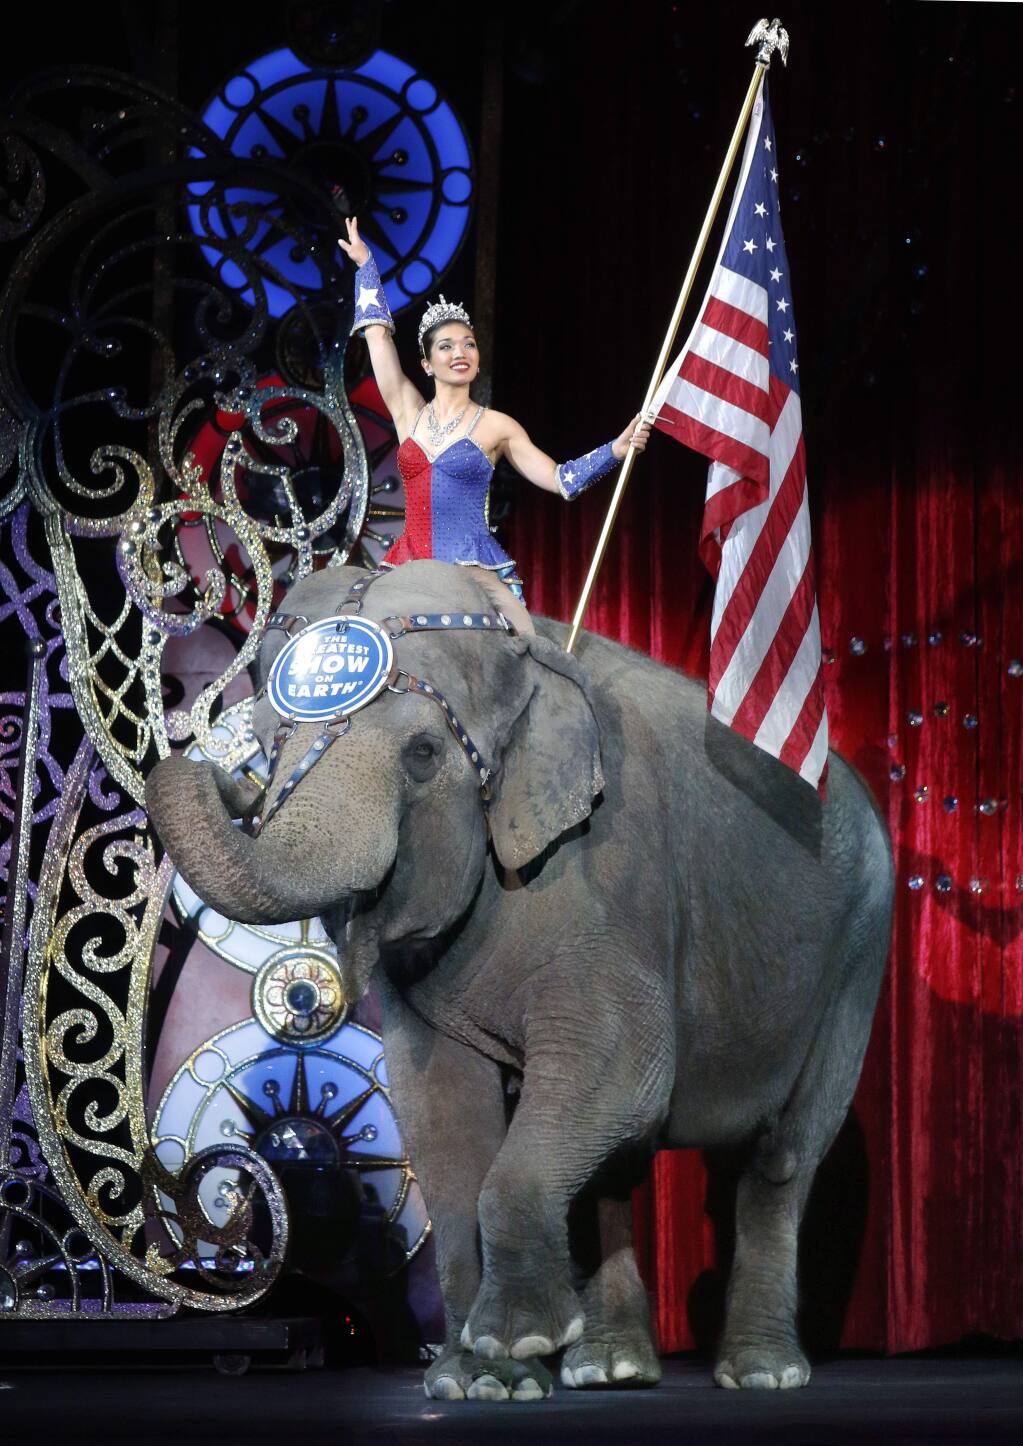 Elephants perform for final time at Ringling Bros. circus